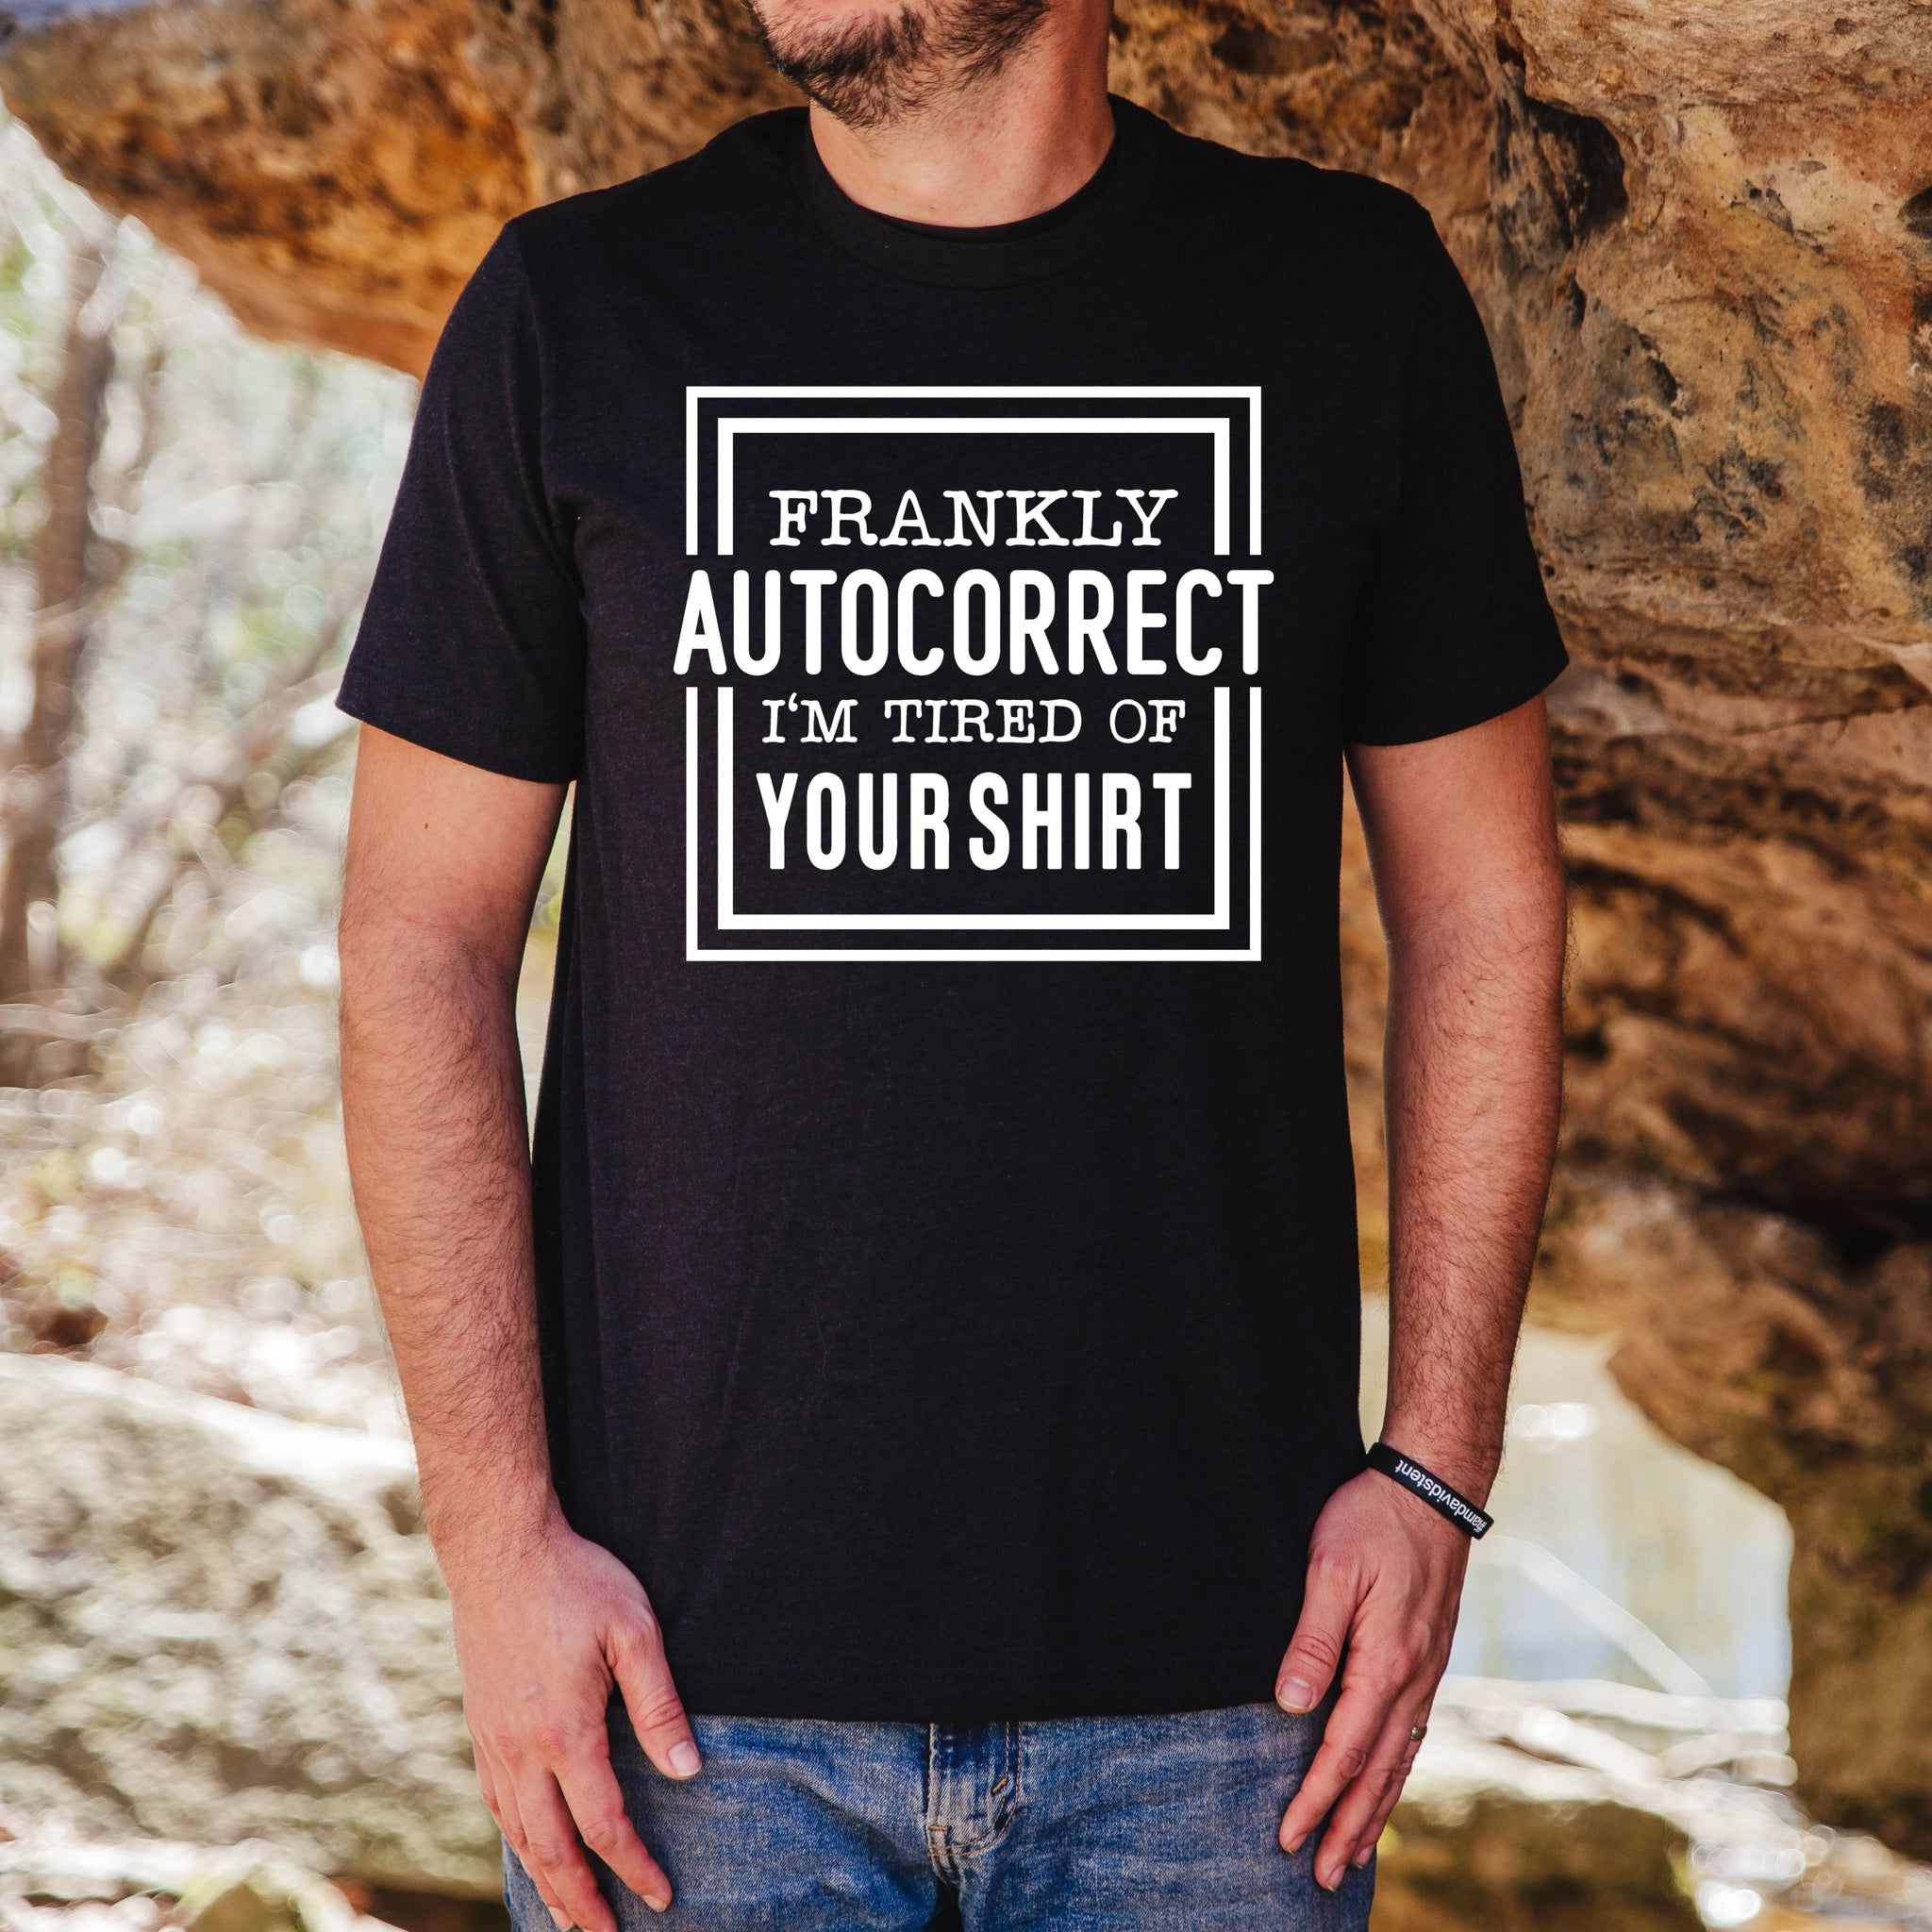 Frankly Autocorrect I’m tired of your shirt!